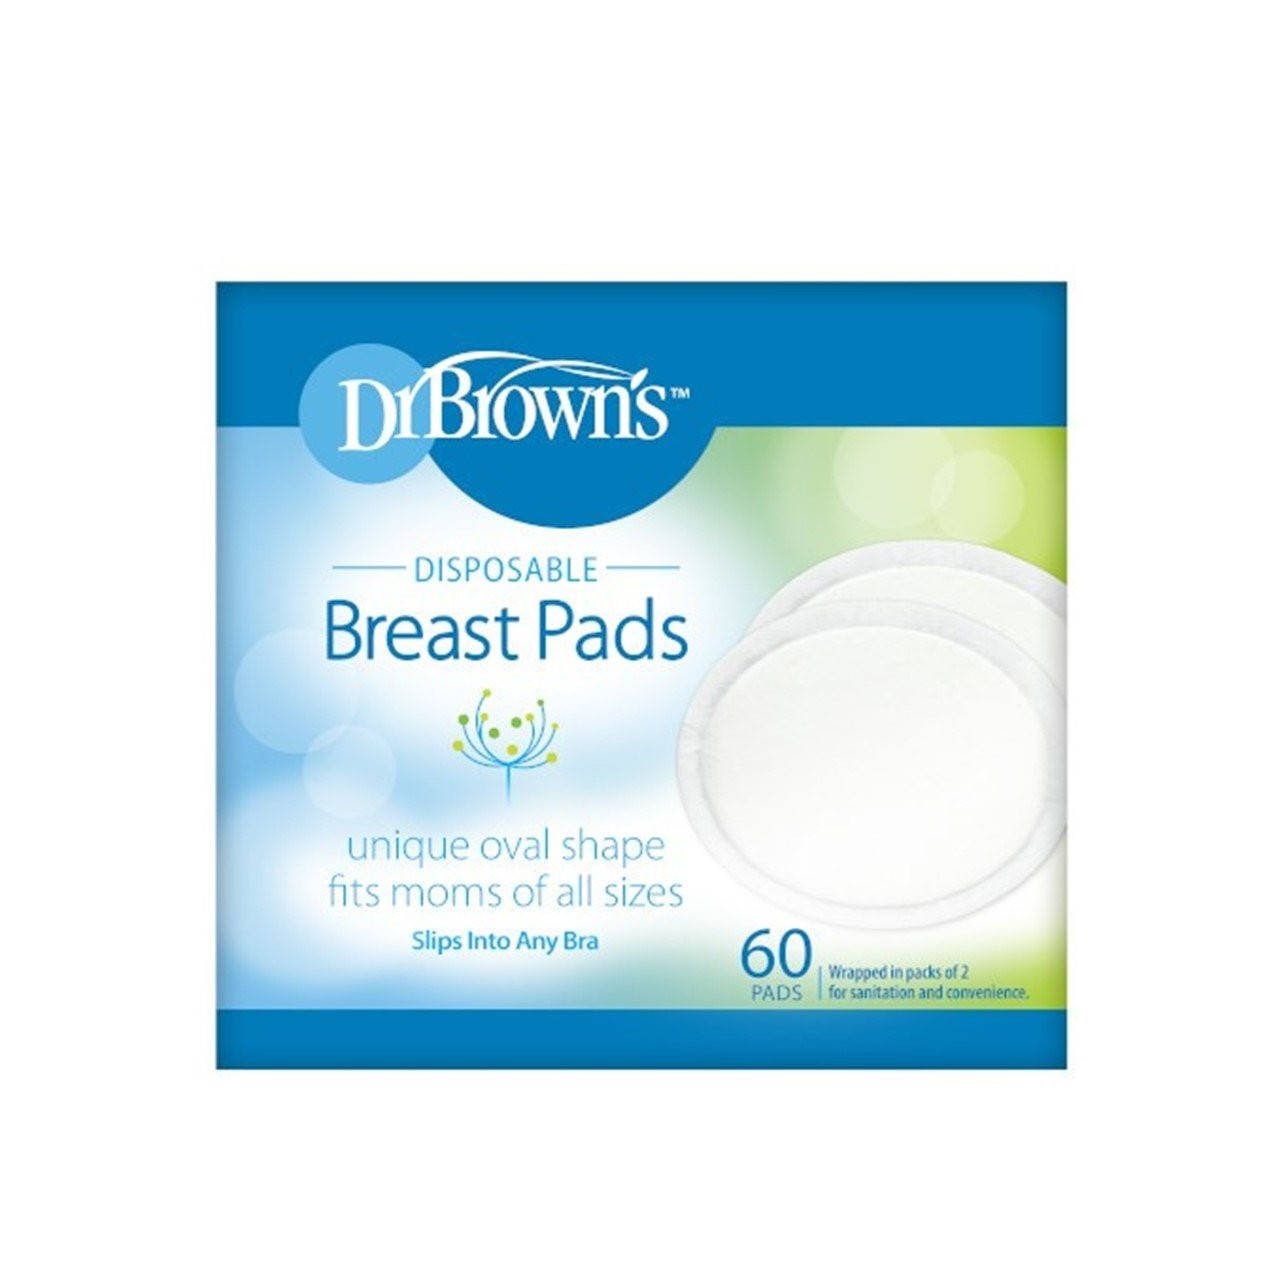 https://static.beautytocare.com/media/catalog/product/d/r/dr-brown-s-disposable-breast-pads-x60_2.jpg